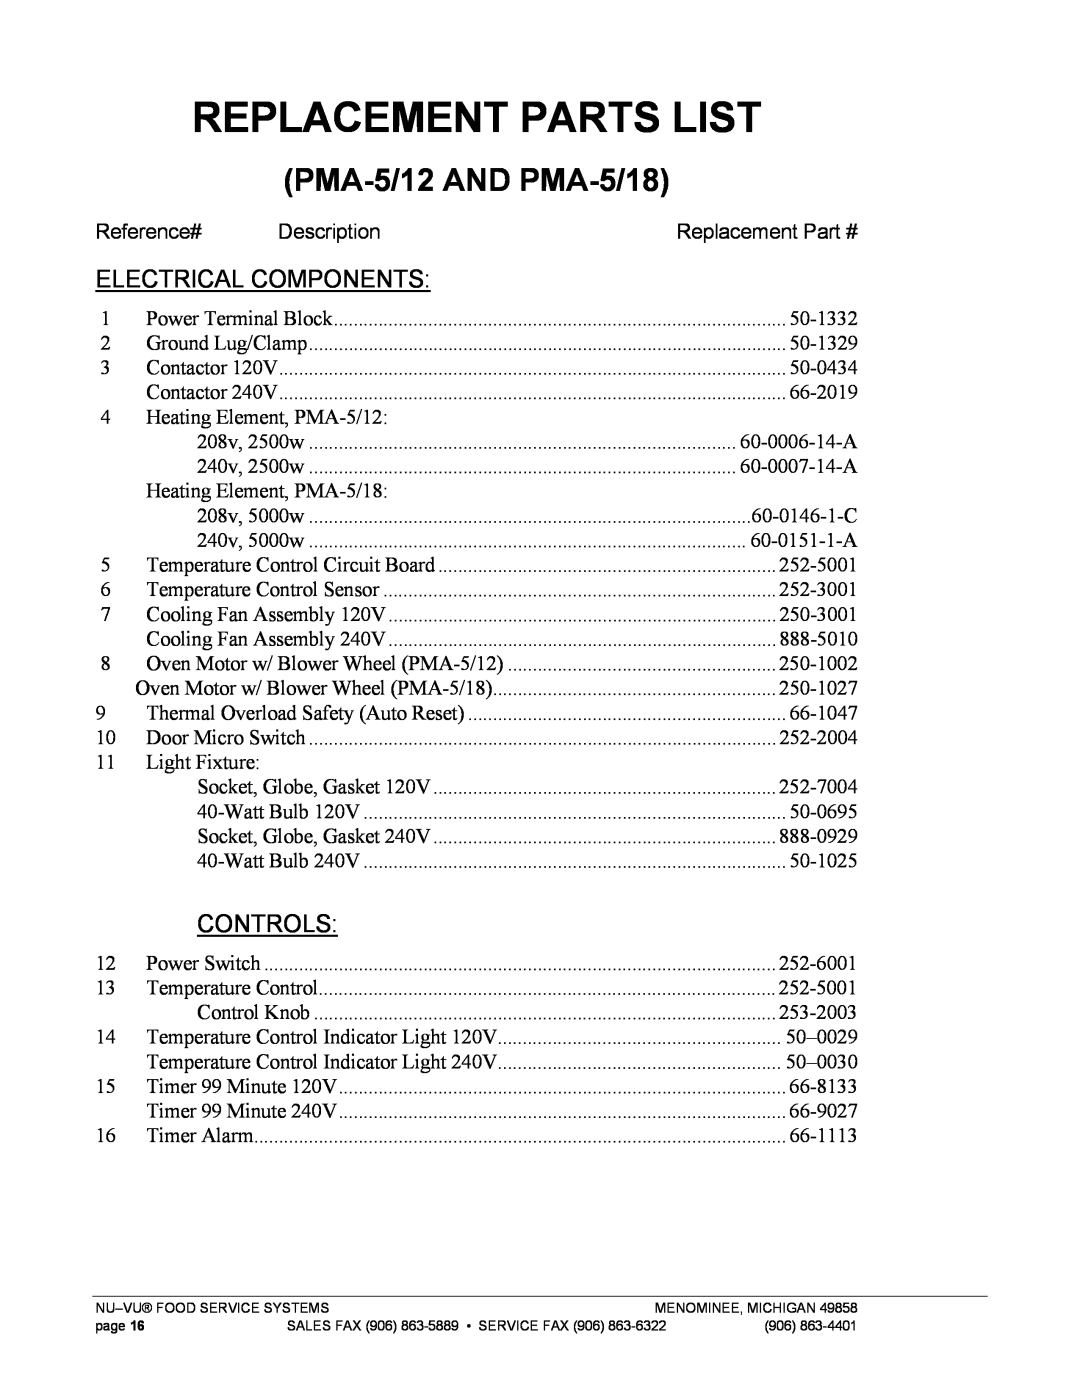 Nu-Vu PMA 5/18, PMA -5/12 owner manual Replacement Parts List, PMA-5/12AND PMA-5/18, Electrical Components, Controls 